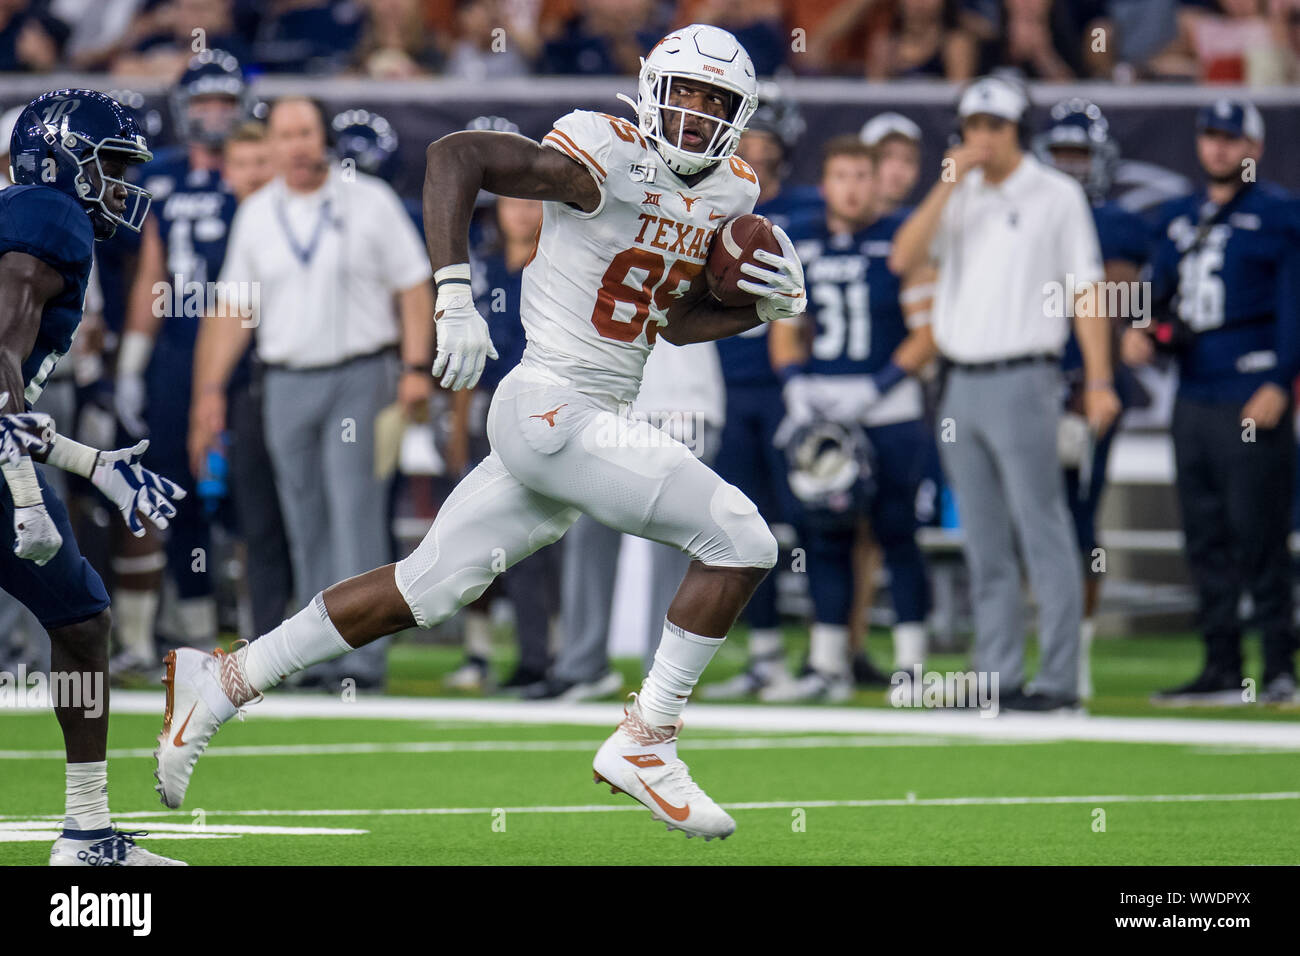 Houston, TX, USA. 14th Sep, 2019. Texas Longhorns wide receiver Malcolm Epps (85) runs after making a catch during the 1st quarter of an NCAA football game between the Texas Longhorns and the Rice Owls at NRG Stadium in Houston, TX. Texas won the game 48 to 13.Trask Smith/CSM/Alamy Live News Stock Photo